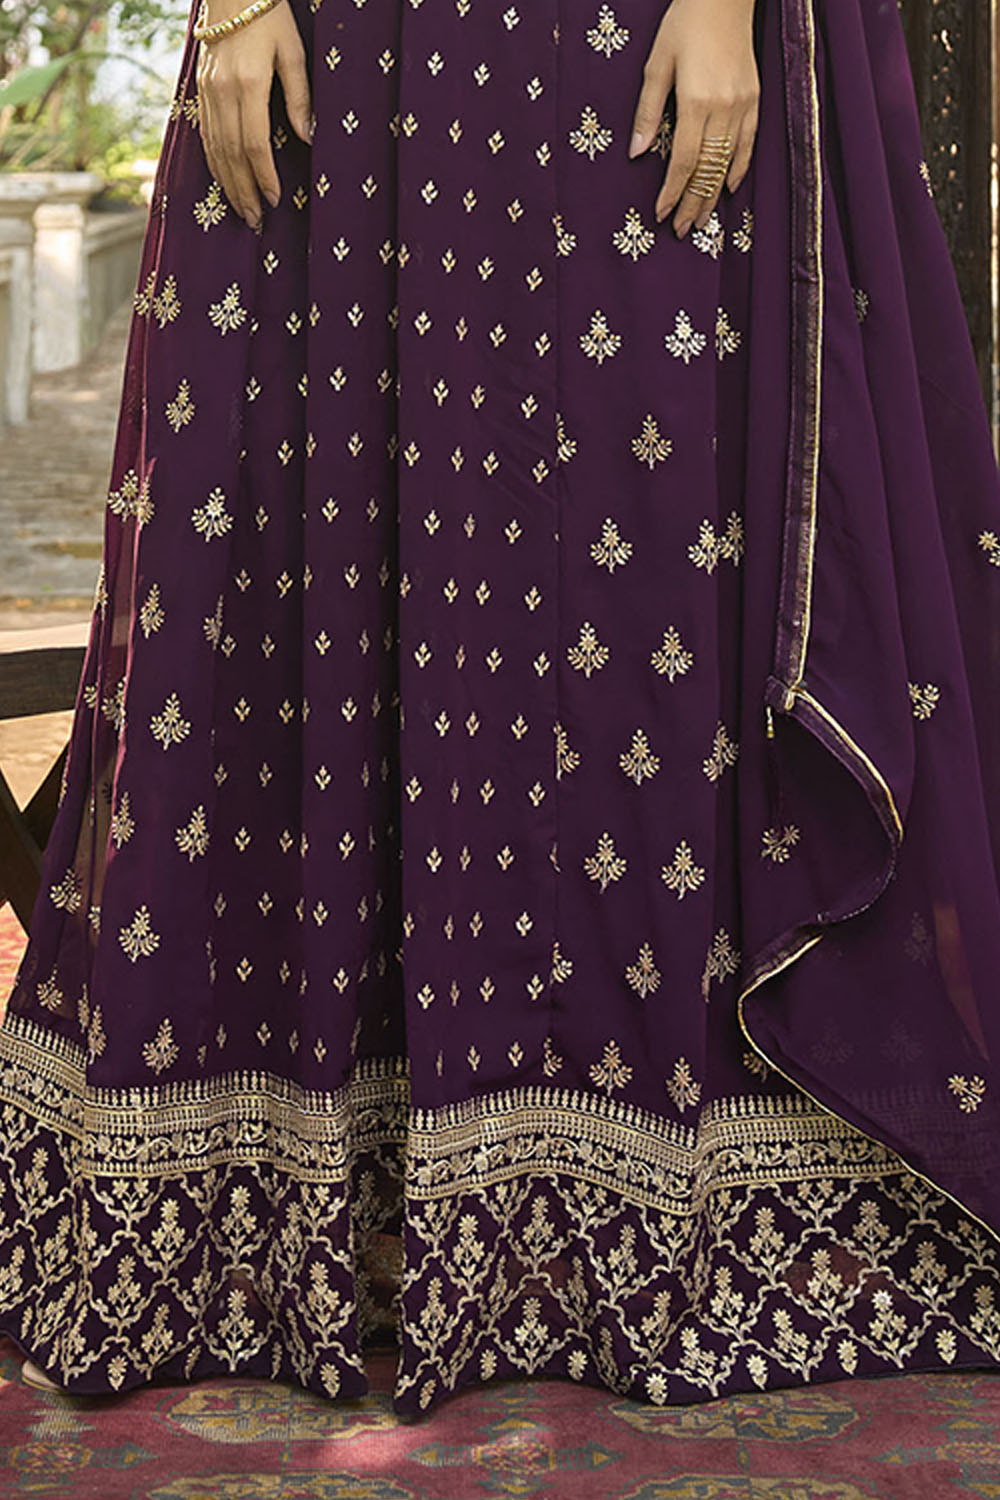 Dark Plum Embroidered Partywear Gown Suit with Dupatta